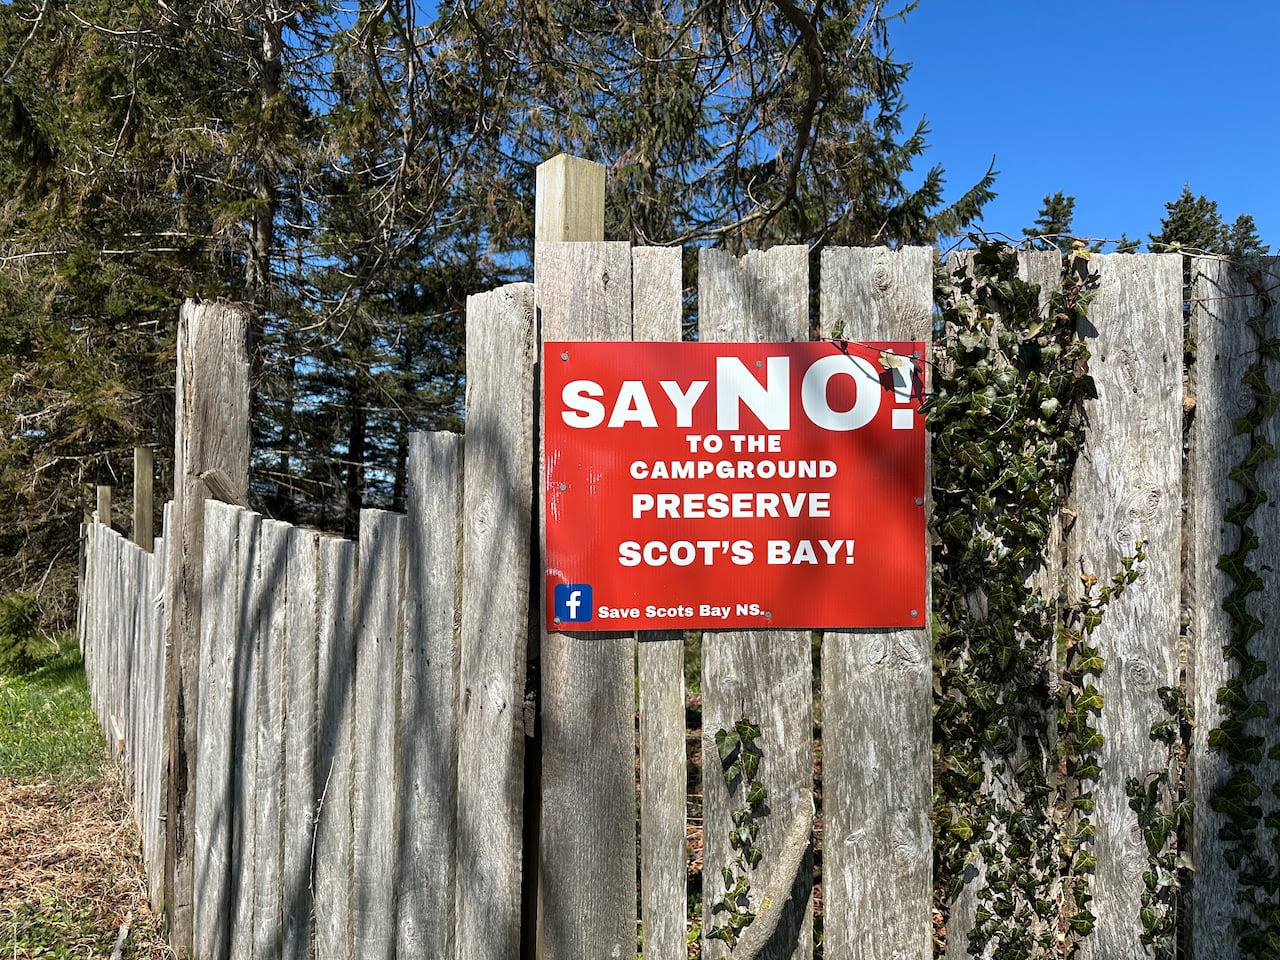 Neighbour files appeal over controversial Scots Bay campground